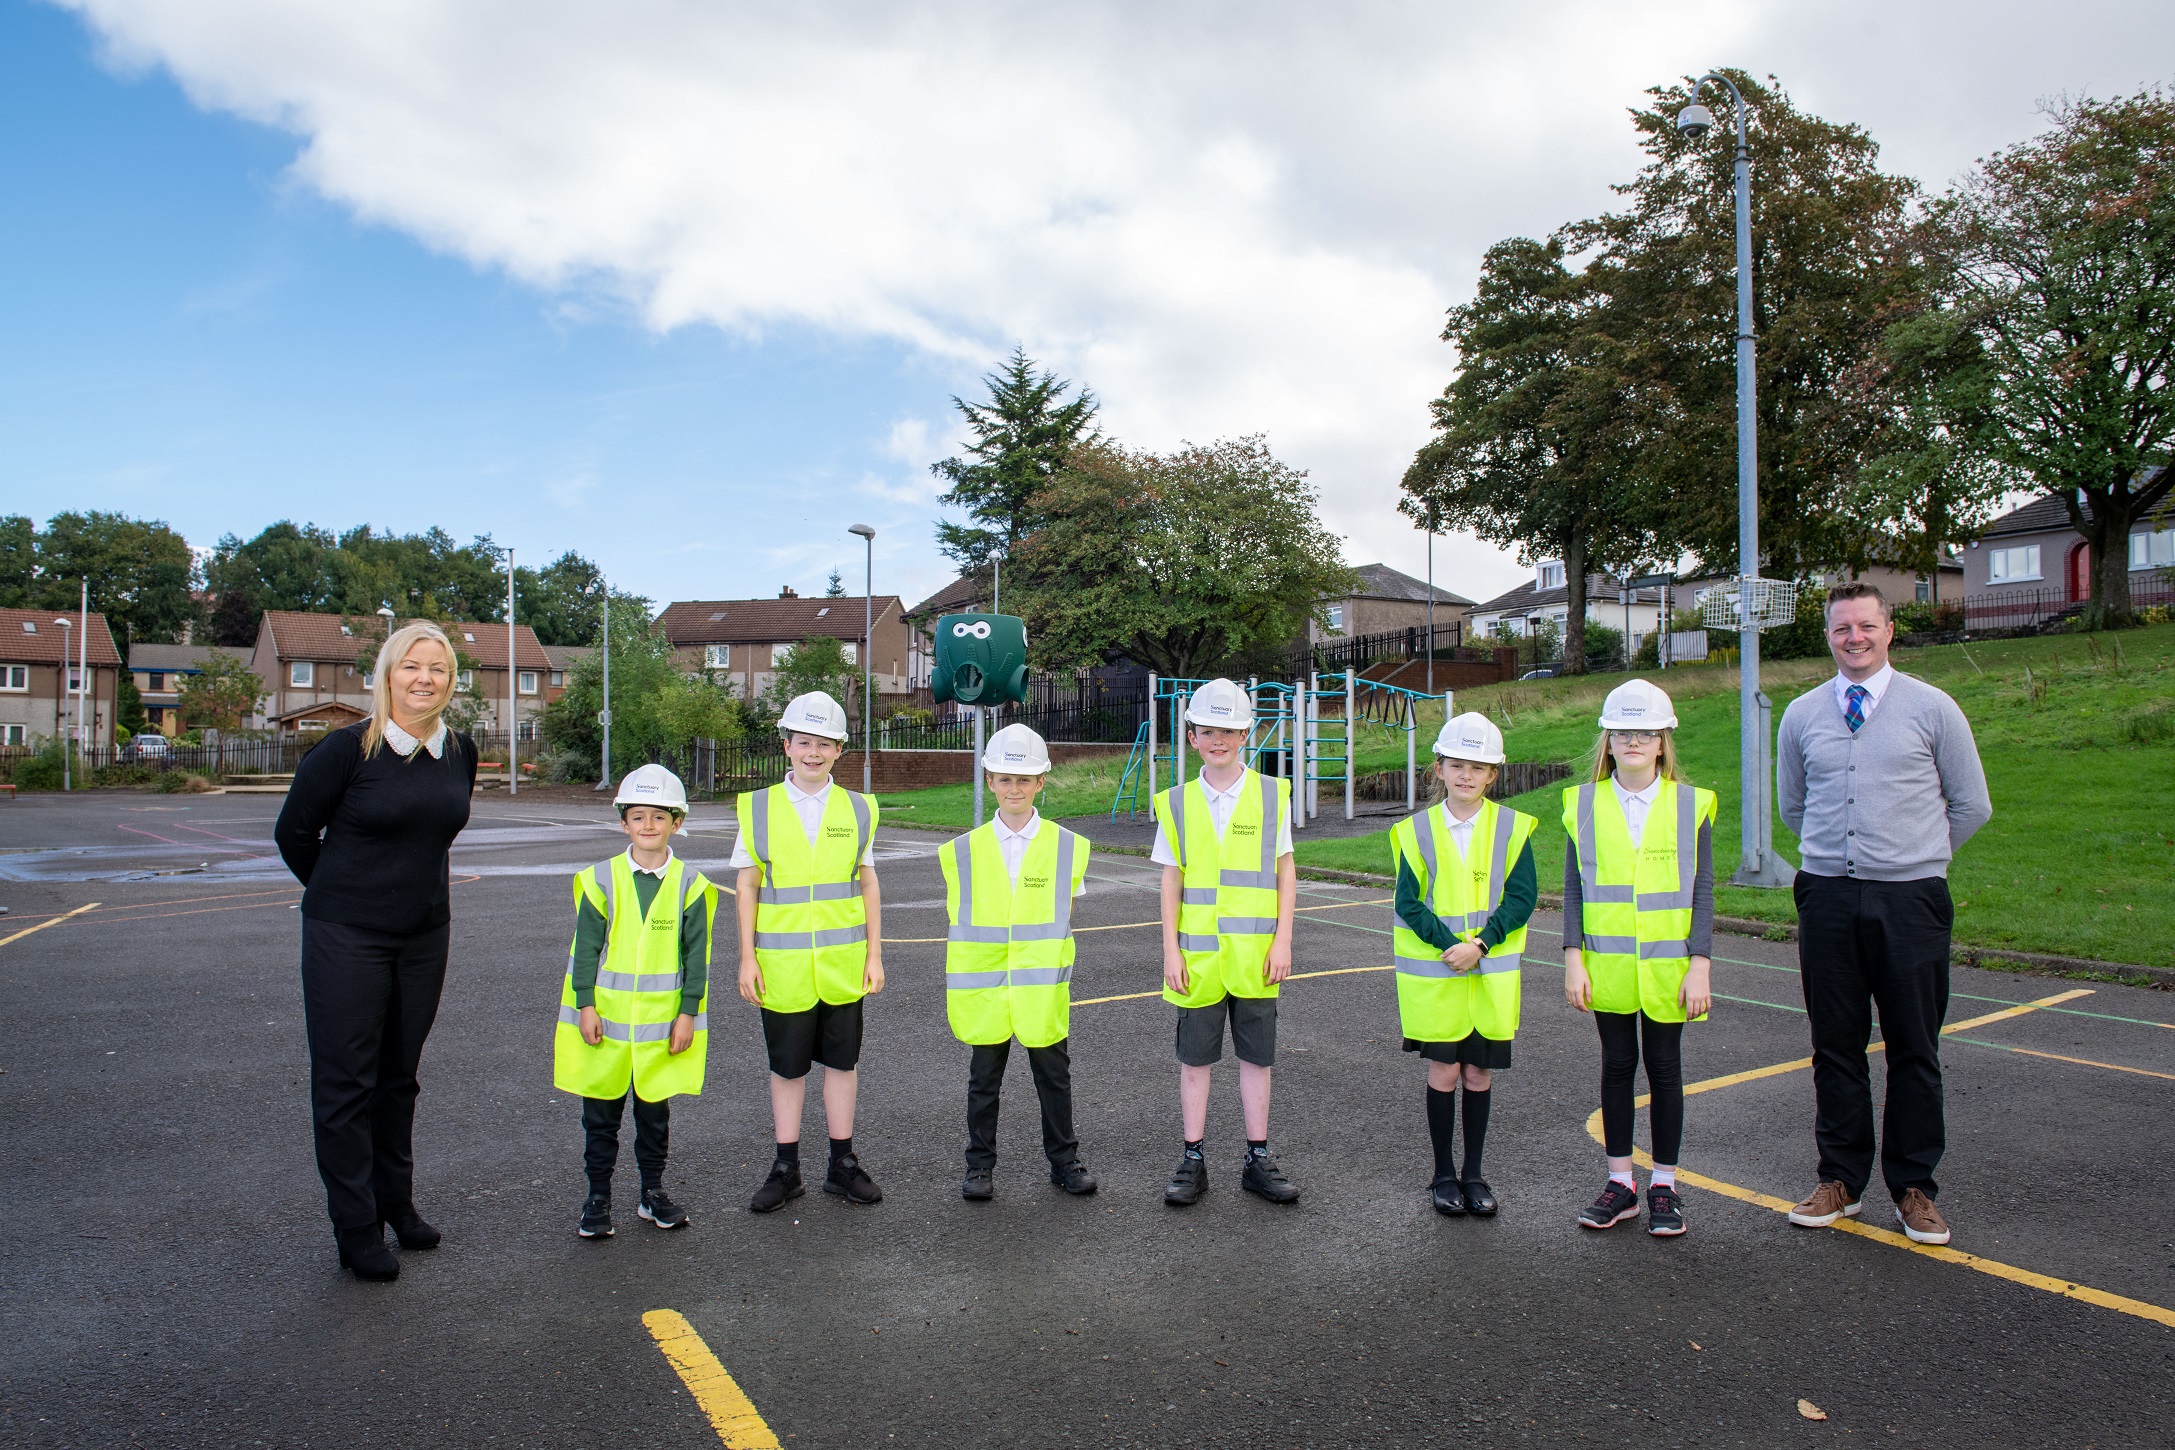 Paisley school receives funds from Sanctuary towards new play area